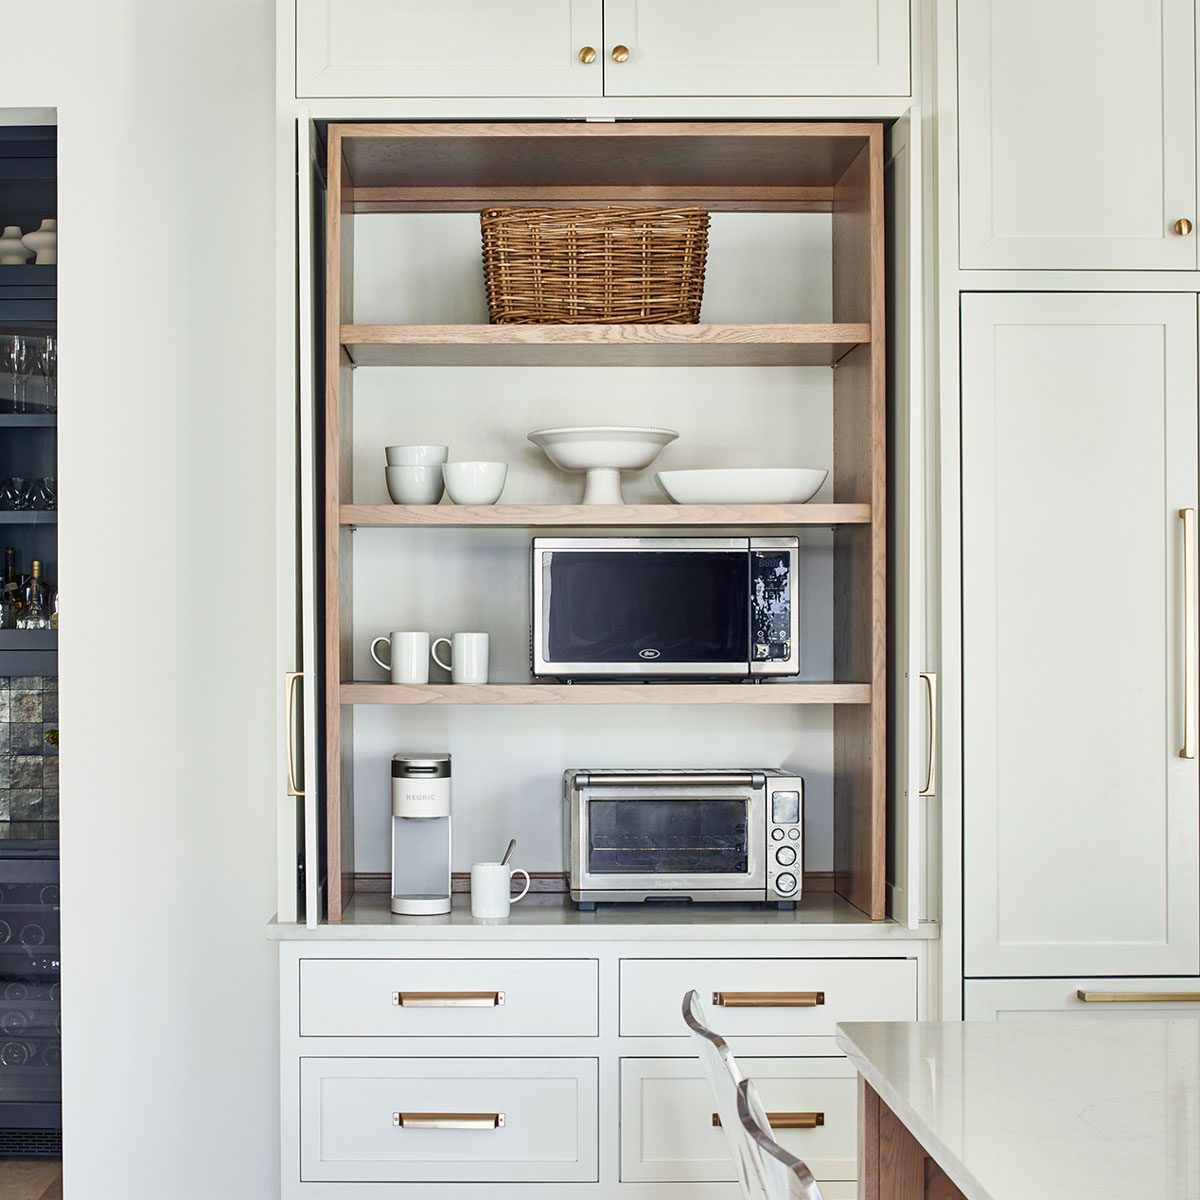 Appliance garages, pull-out shelves help organize kitchen